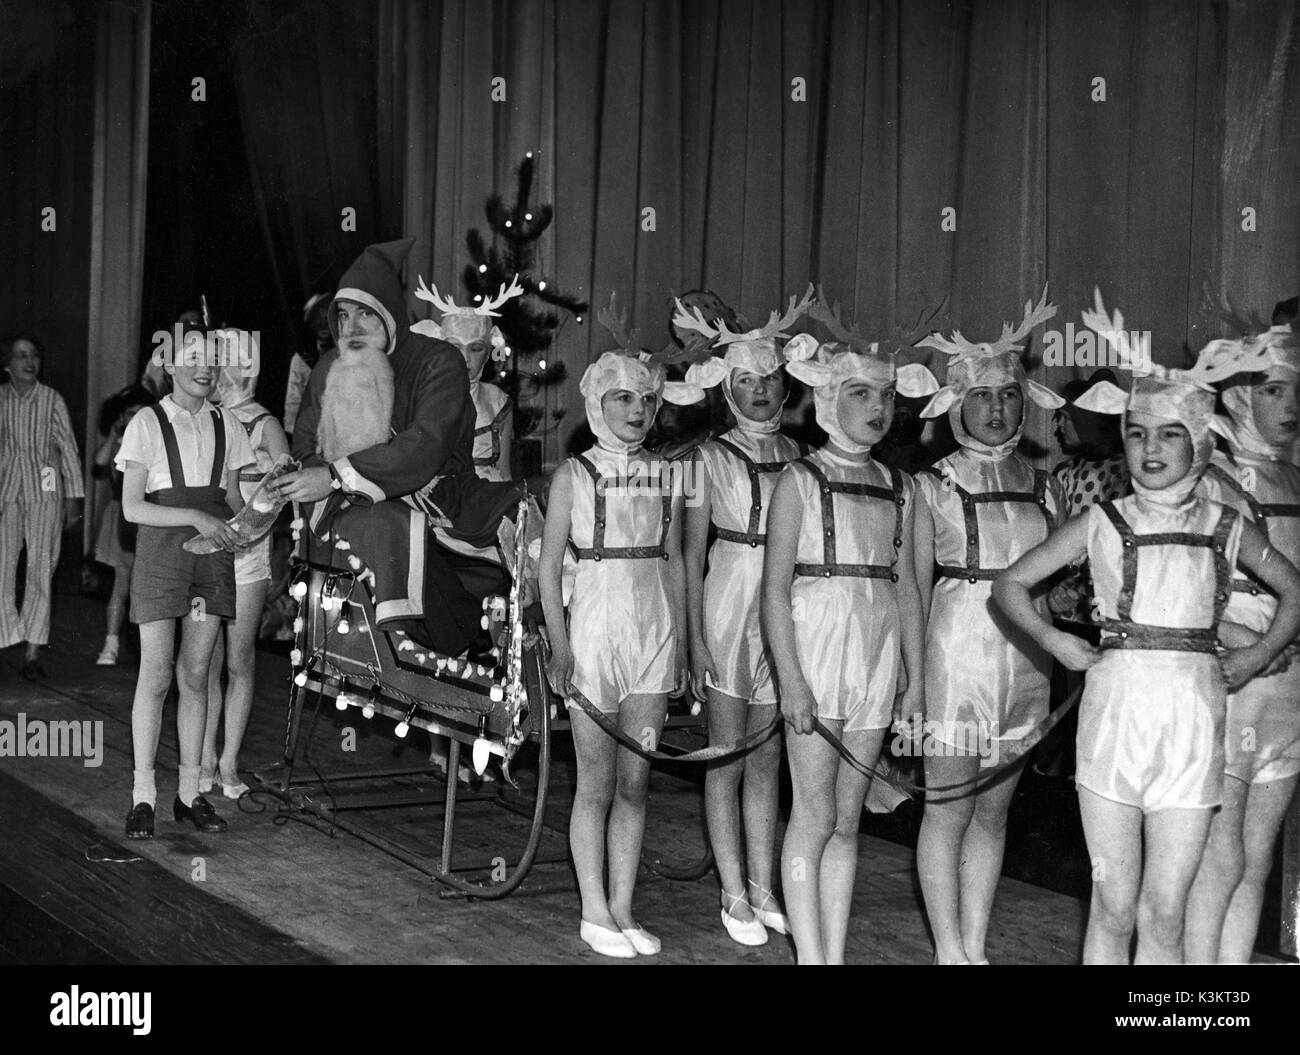 Santa arriving on stage at an unidentified Christmas play Stock Photo